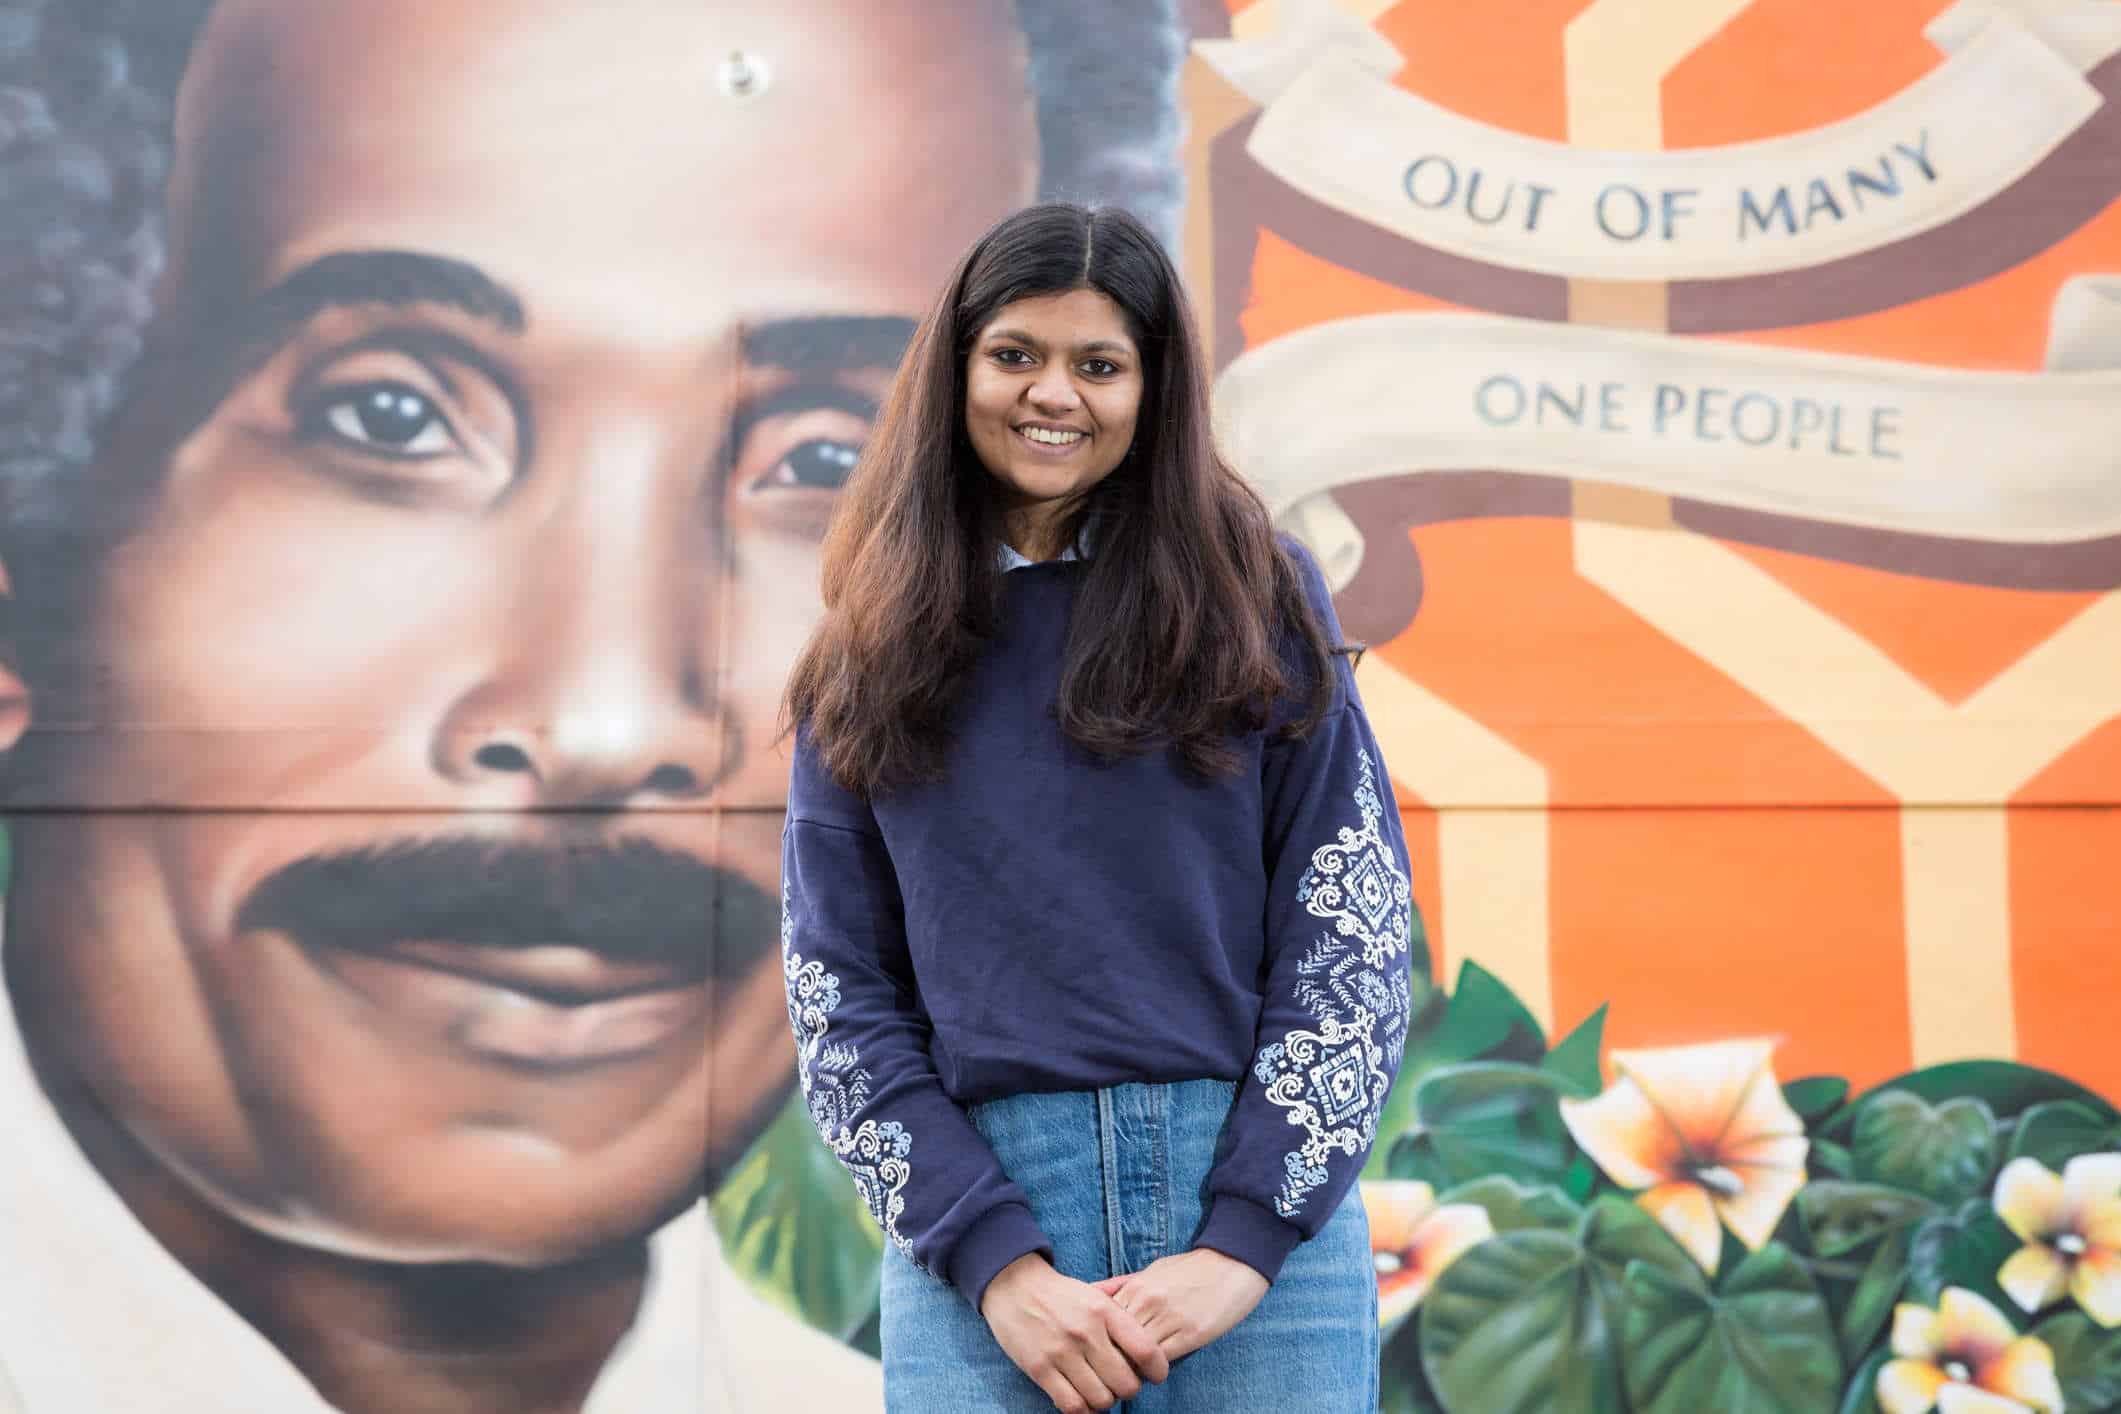 Paridhhi stands in front of a large mural, smiling at the camera.